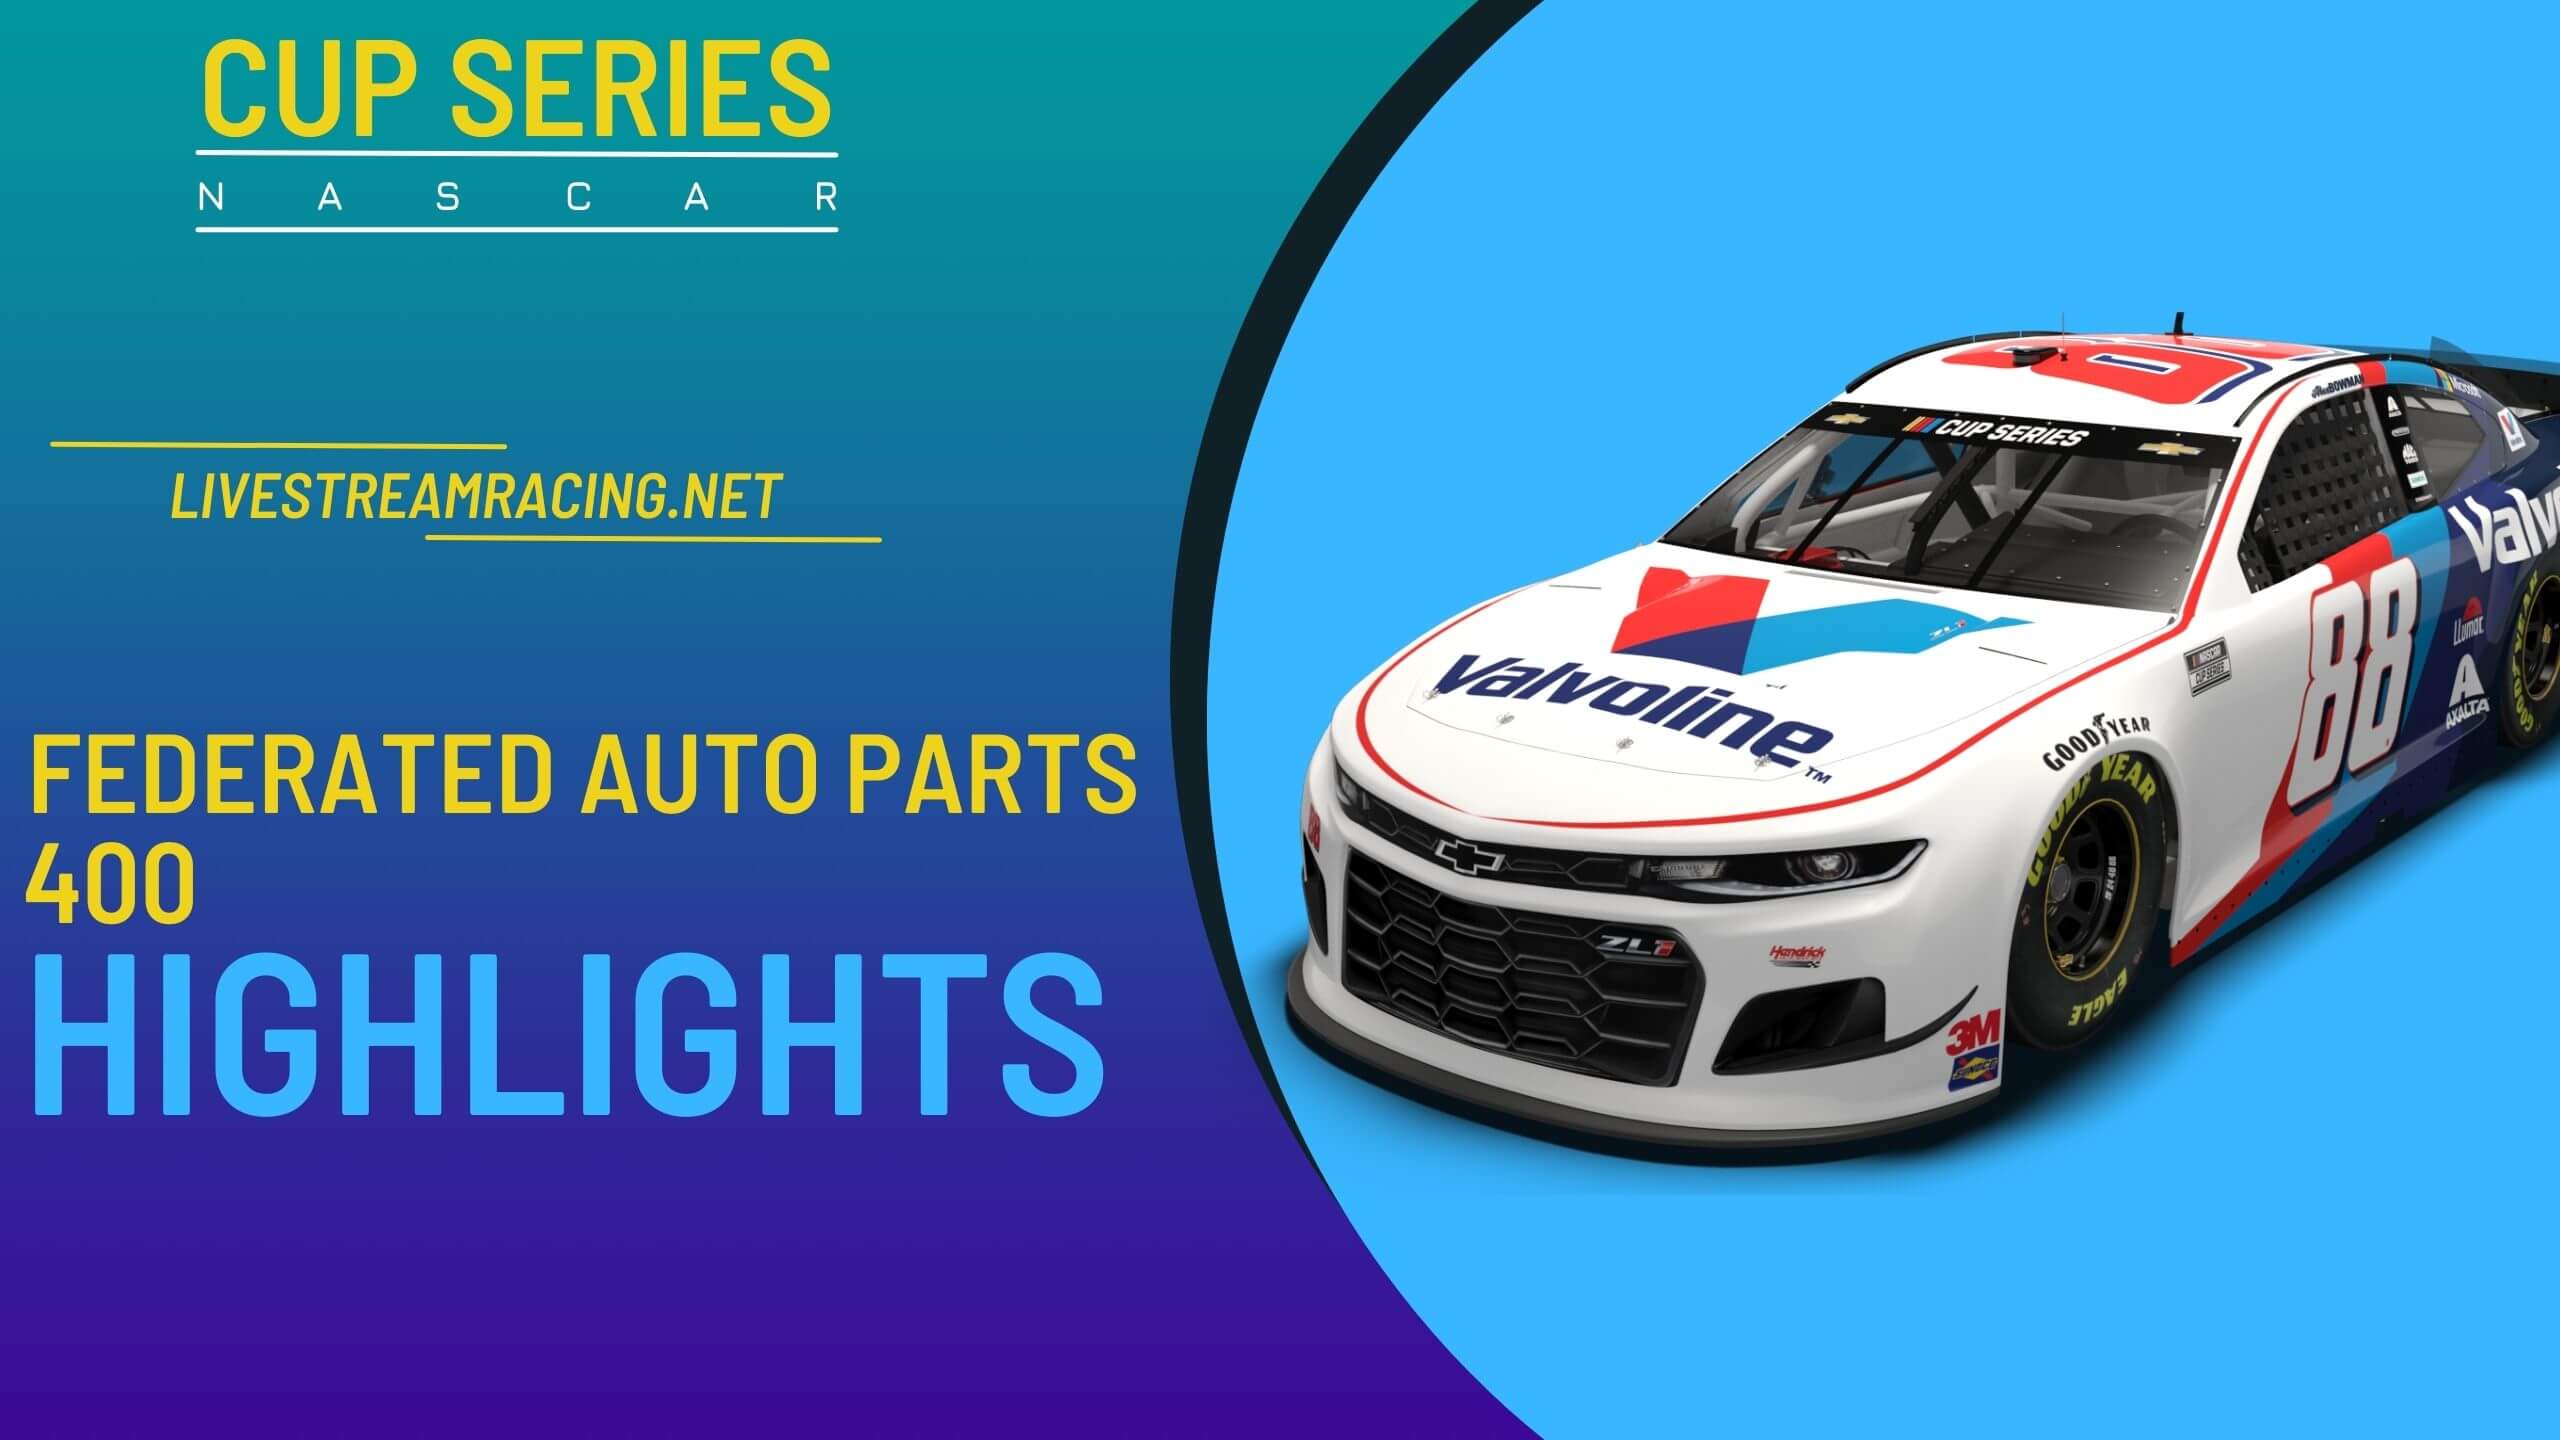 Federated Auto Parts 400 Nascar Highlights 2022 Cup Series